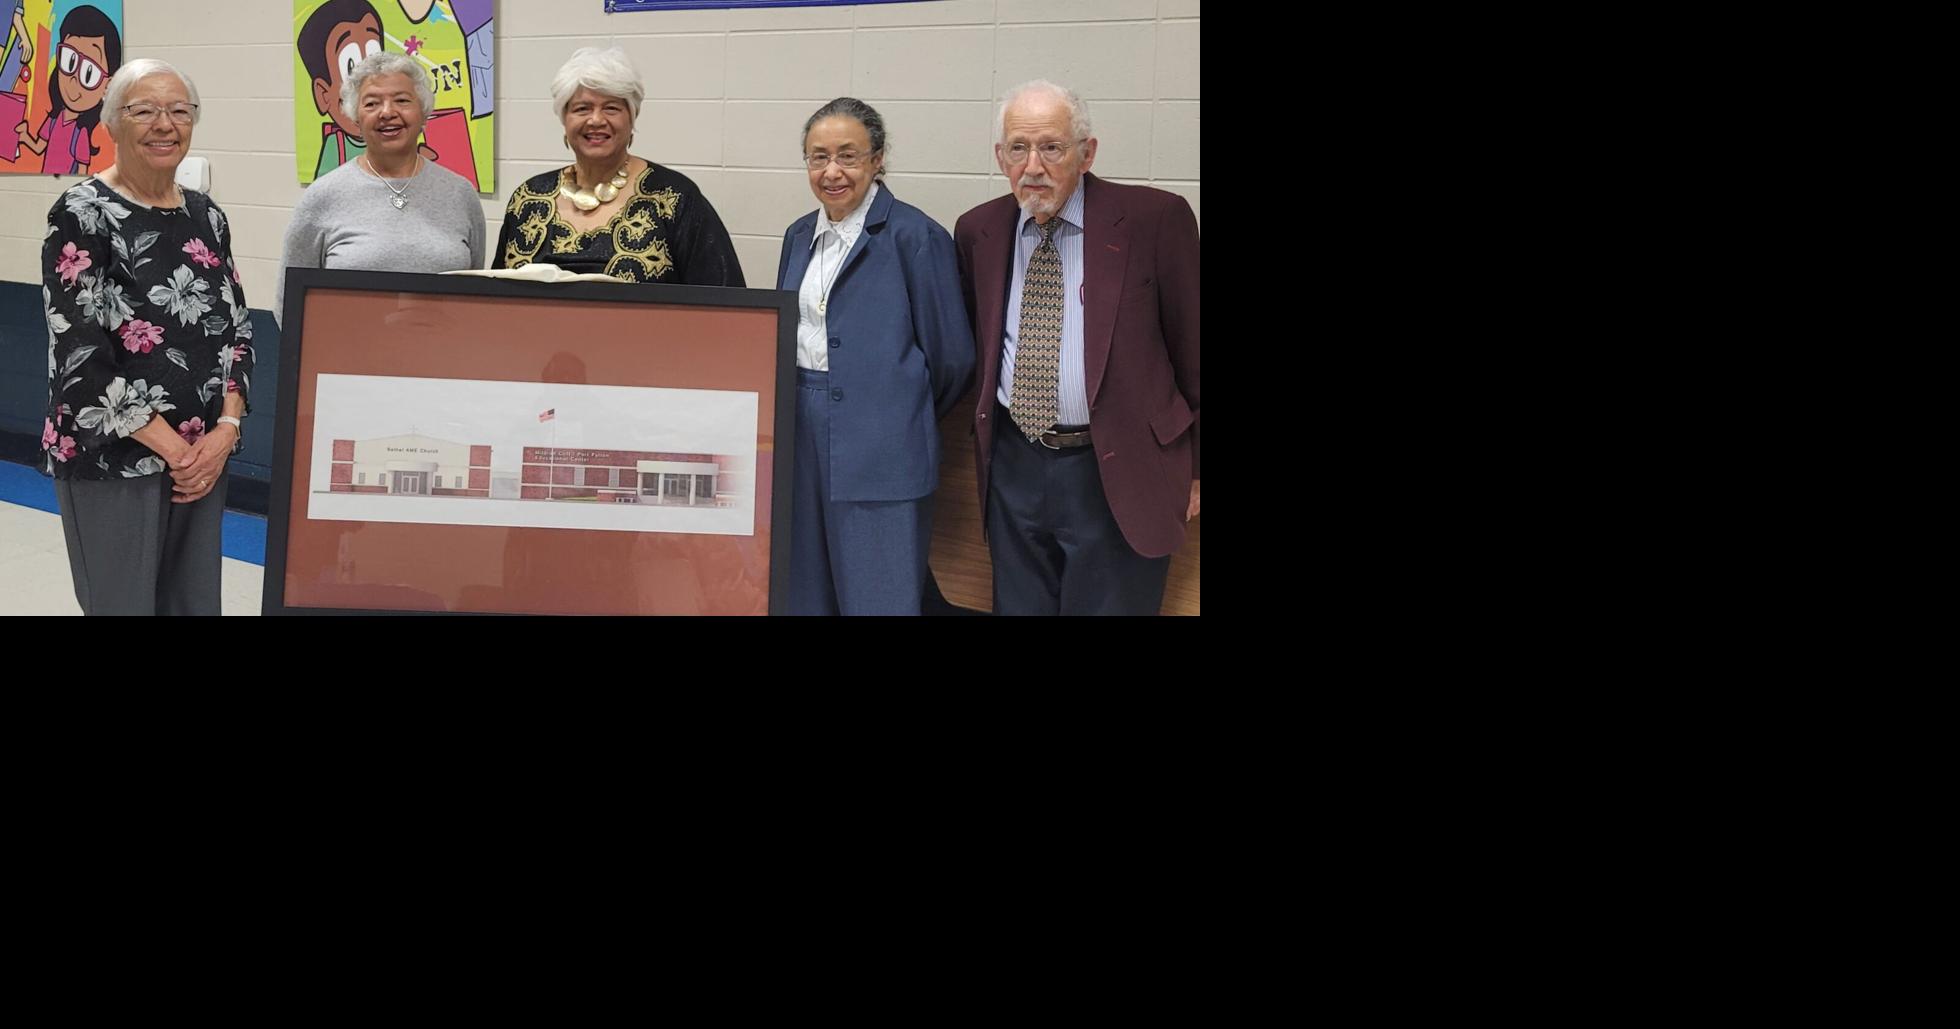 Building renamed the Mildred Clift Port Fulton Educational Center